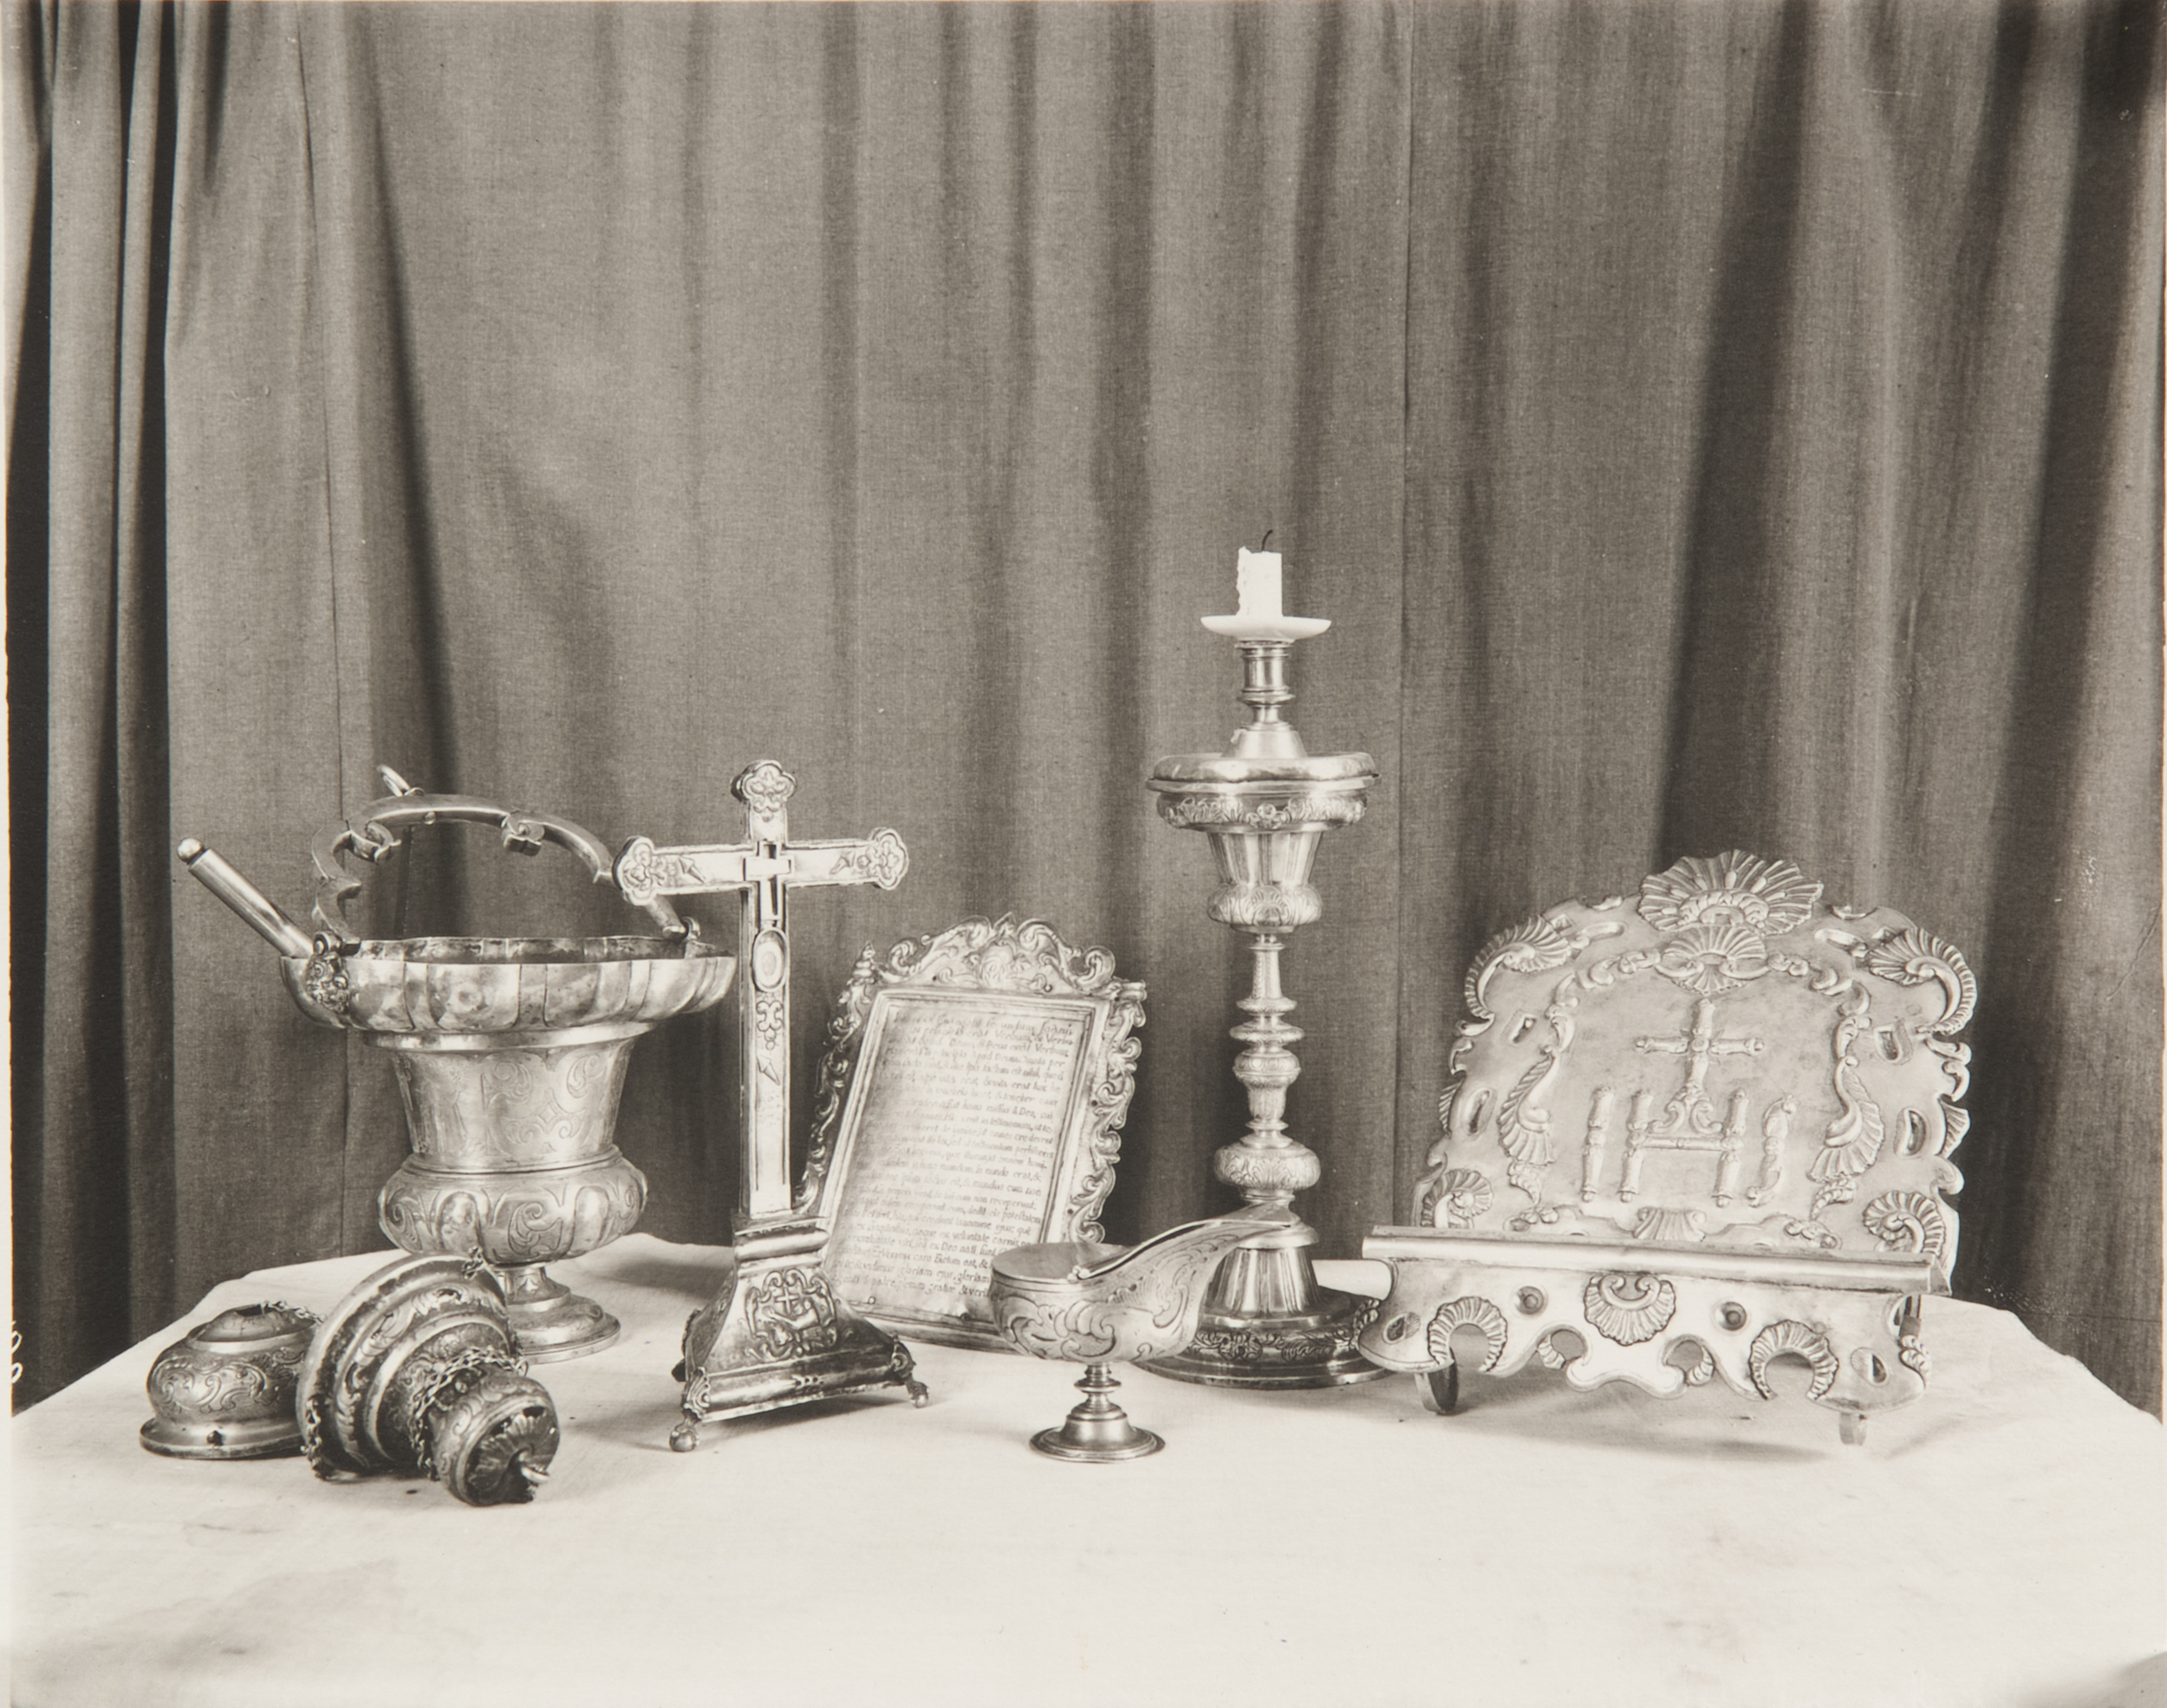 Religious objects: chalice, candle stick, etc